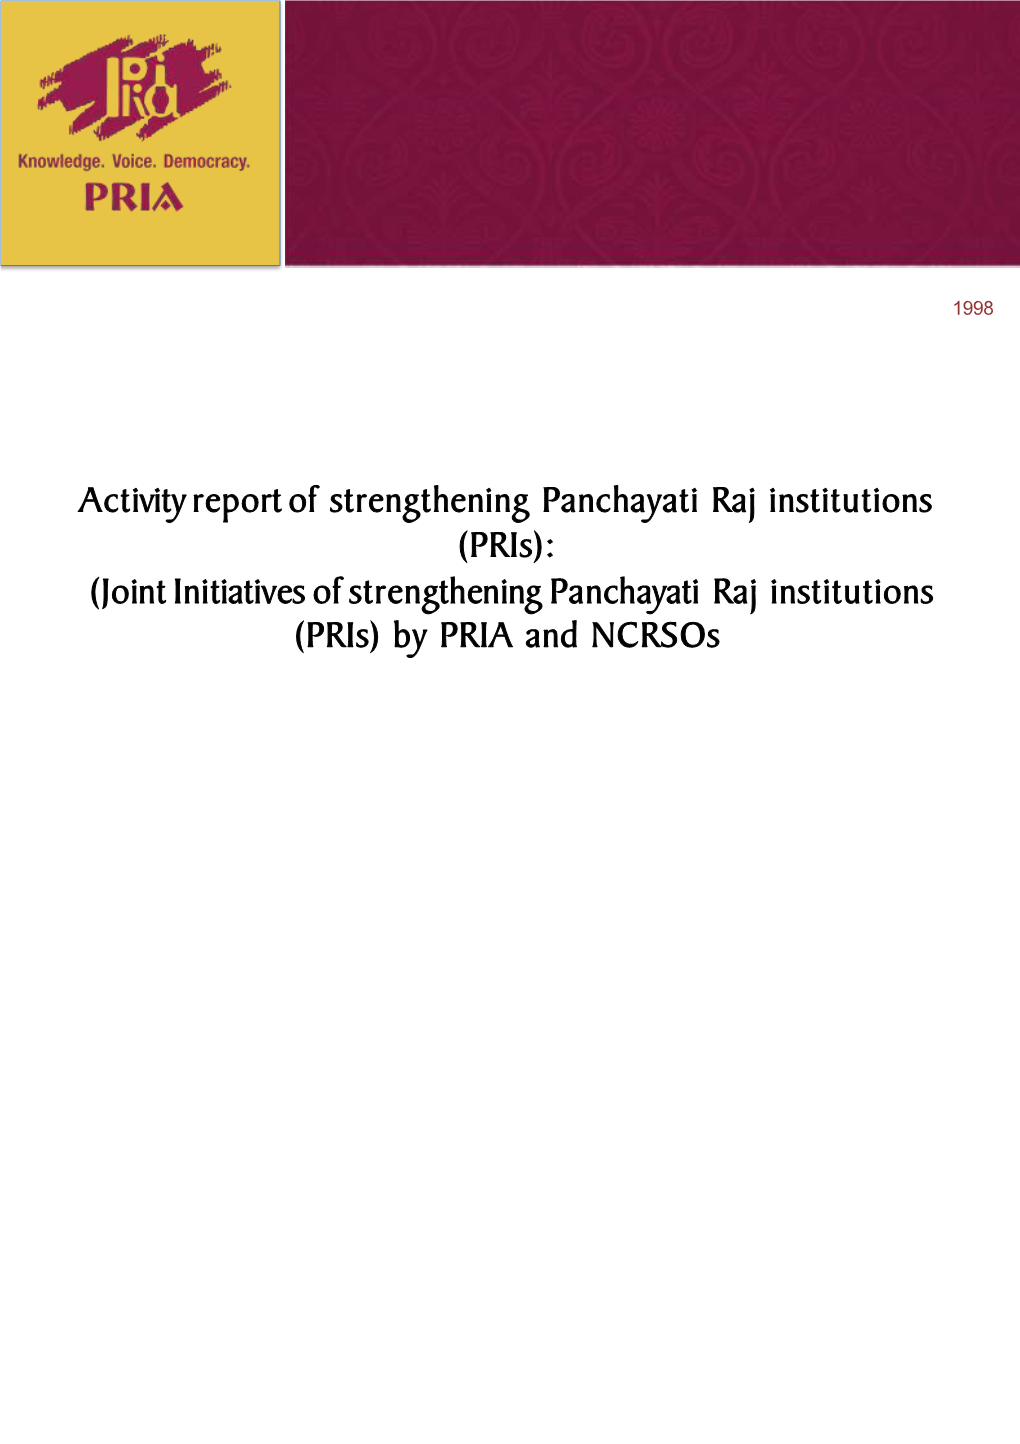 Activity Report of Strengthening Panchayati Raj Institutions (Pris): (Joint Initiatives of Strengthening Panchayati Raj Institutions (Pris) by PRIA and Ncrsos